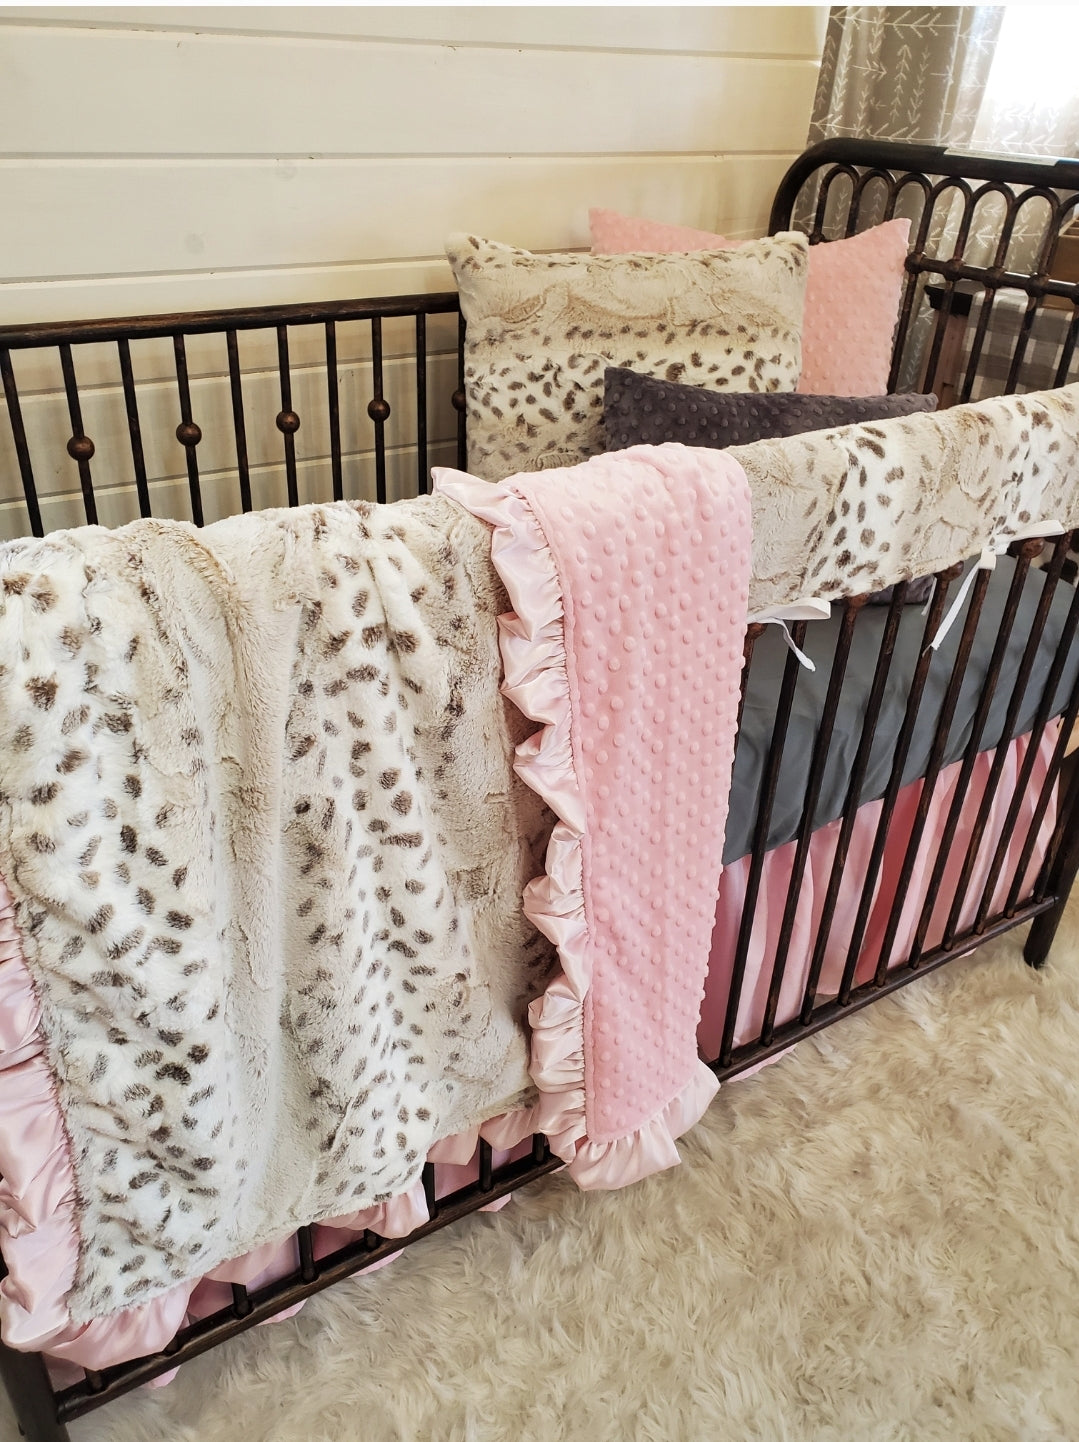 New Release Girl Crib Bedding- Lynx Minky and Blush Baby Bedding Collection - DBC Baby Bedding Co 